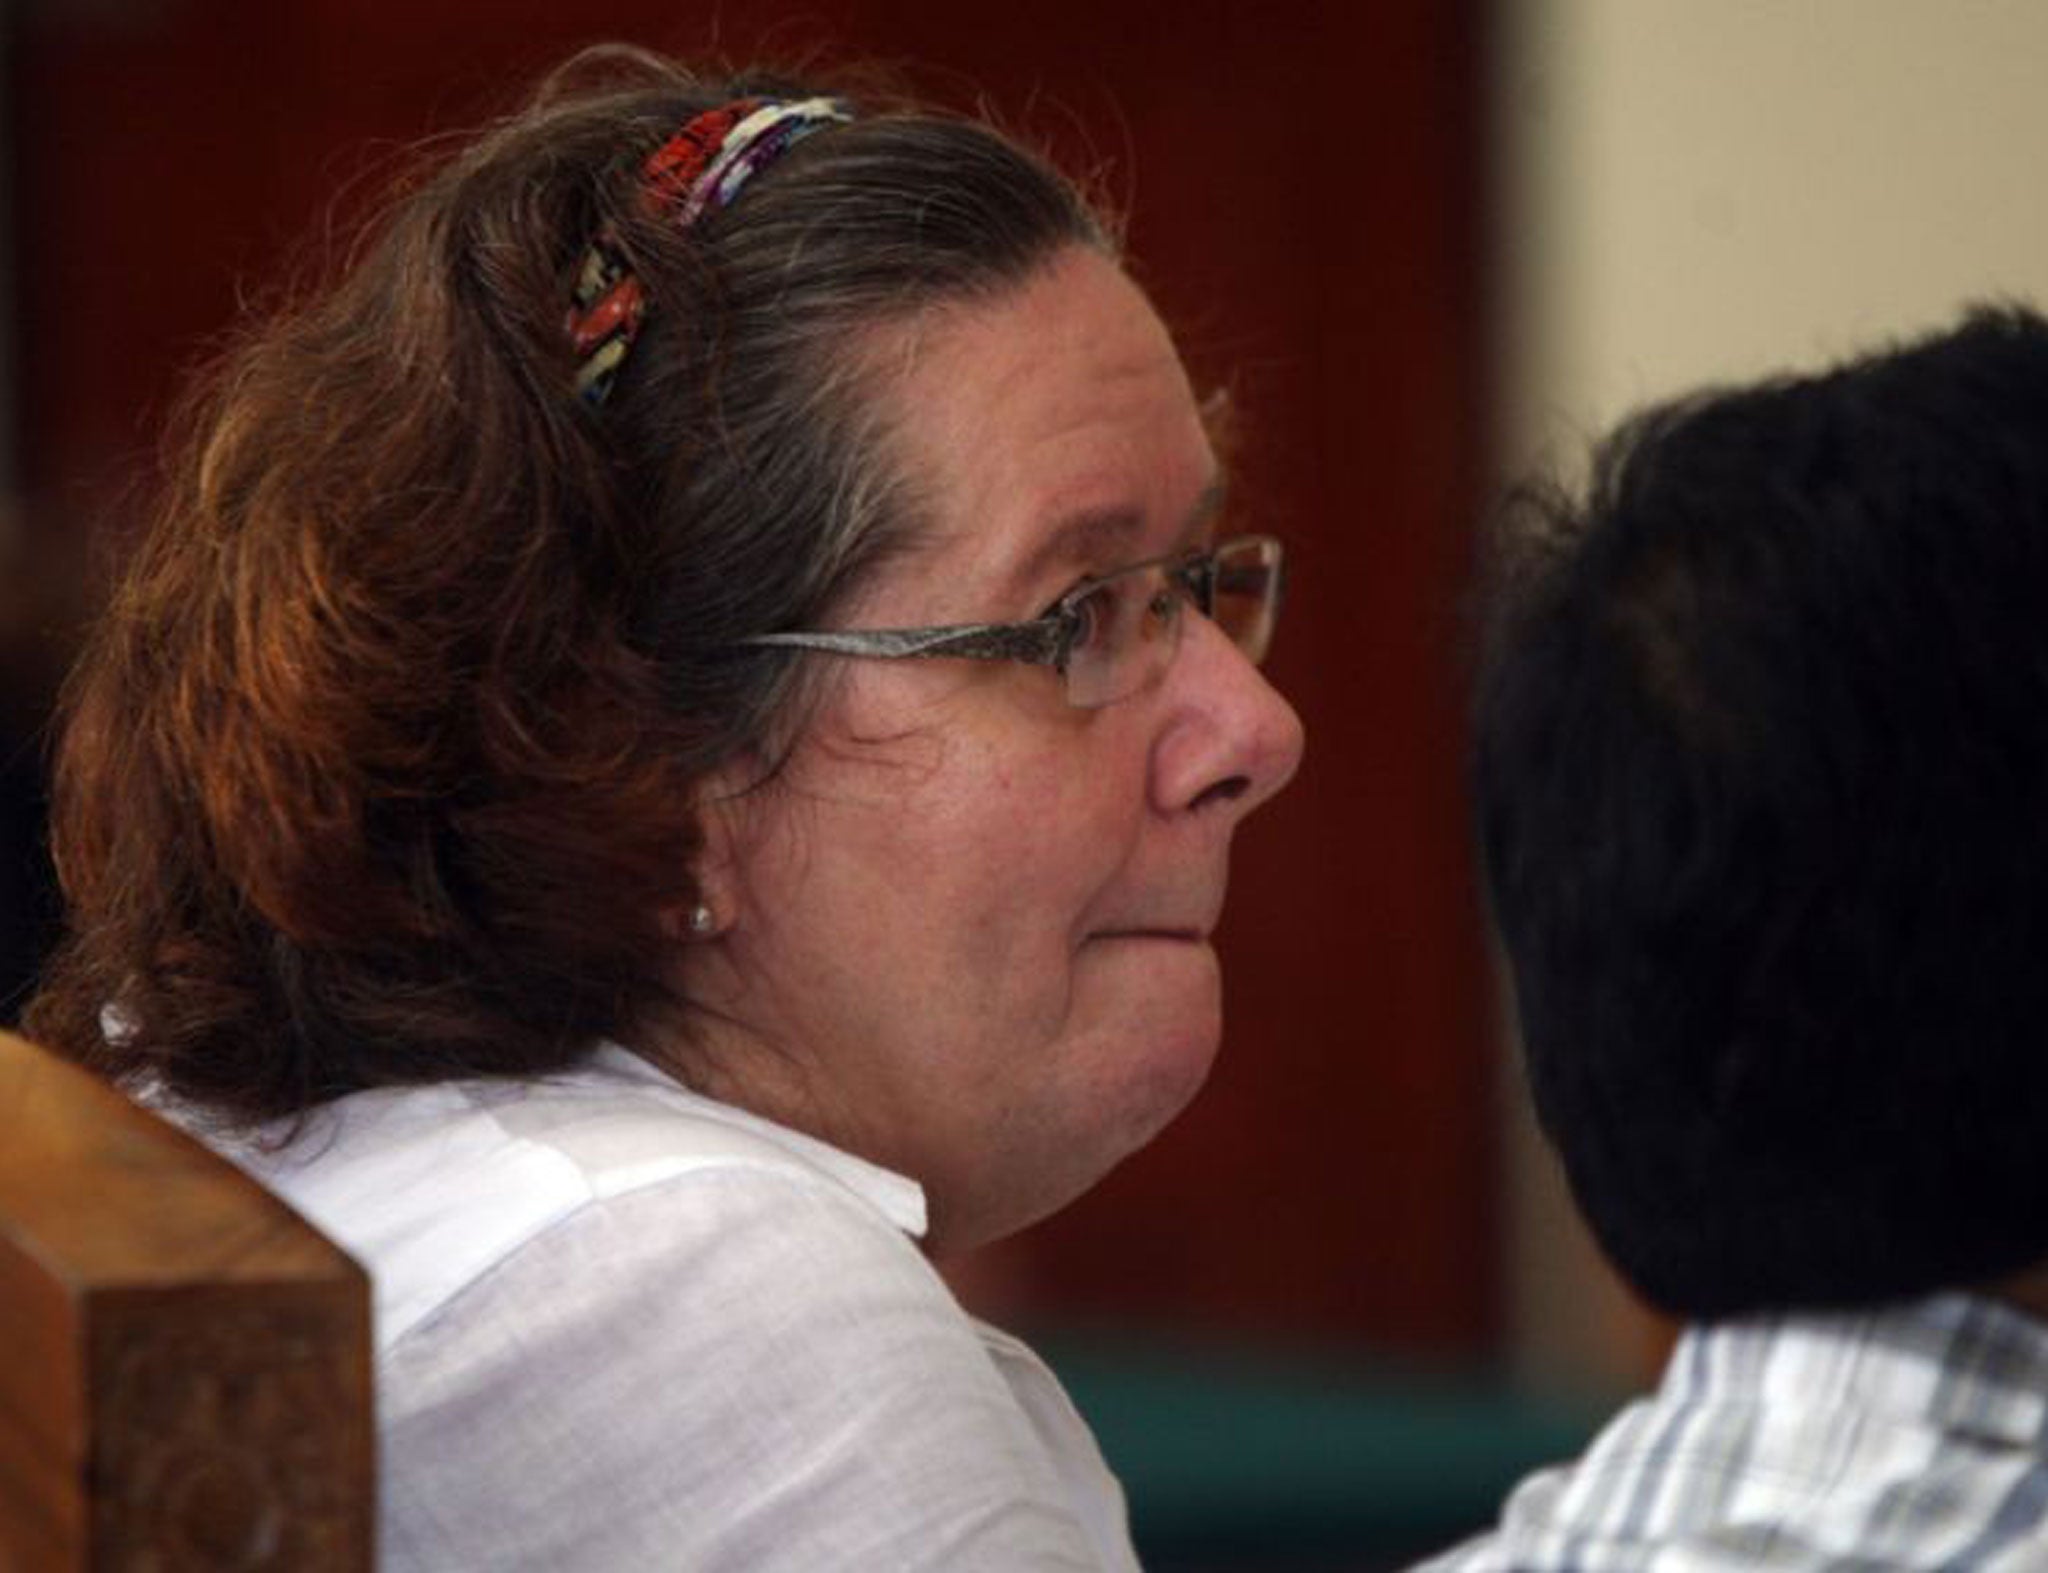 Lindsay Sandiford, 56, was sentenced to death at Denpasar District Court in January